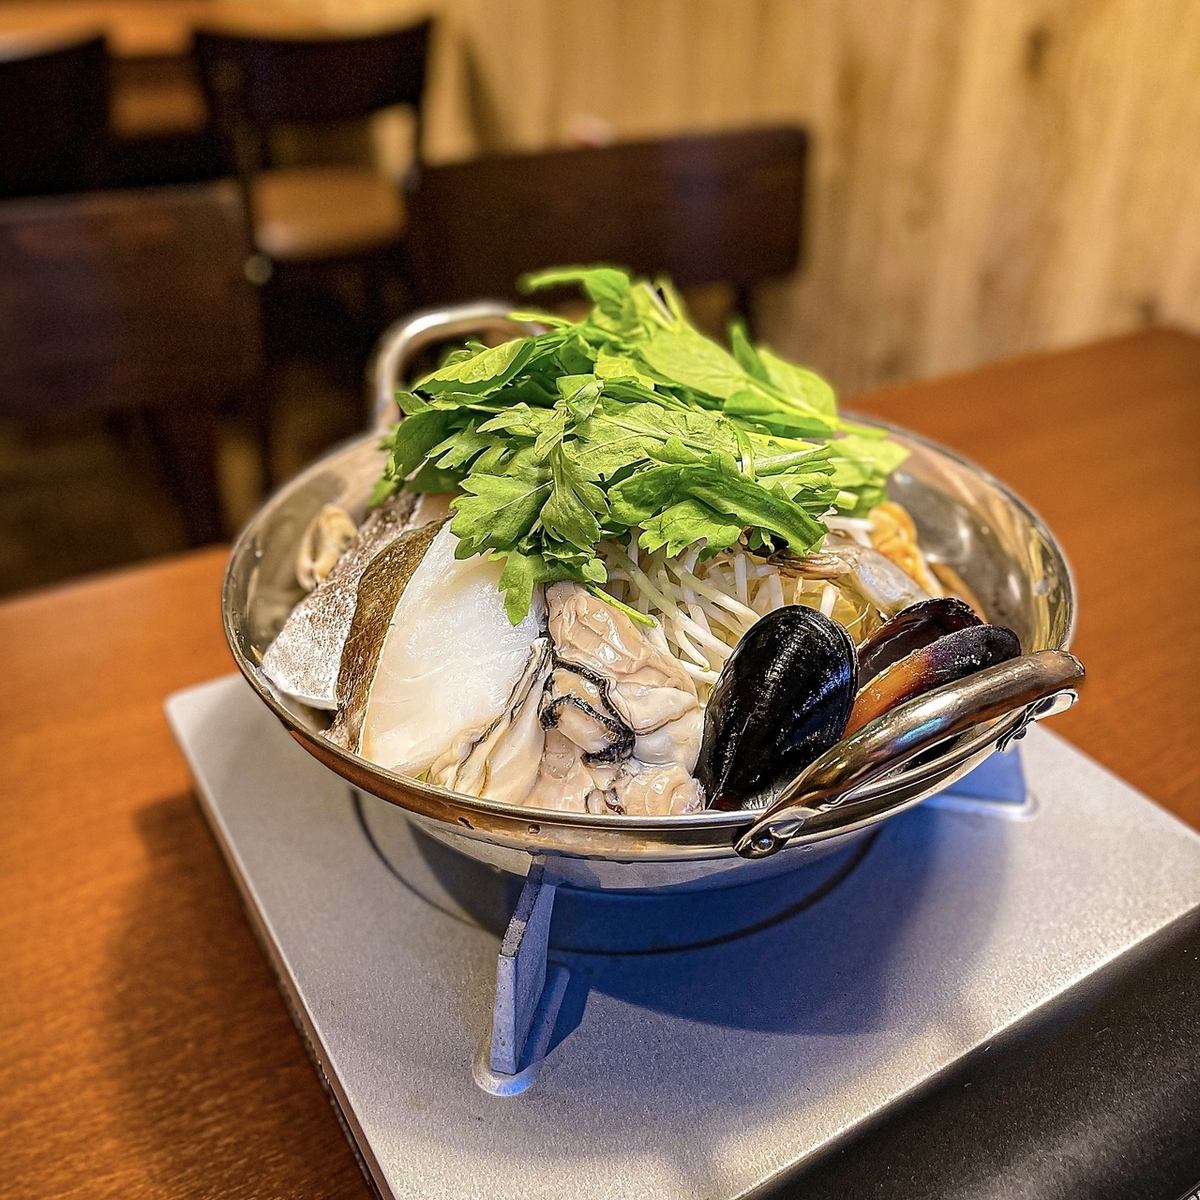 There are also dishes unique to Hiroshima such as haemultan with oysters and conger eel dishes!